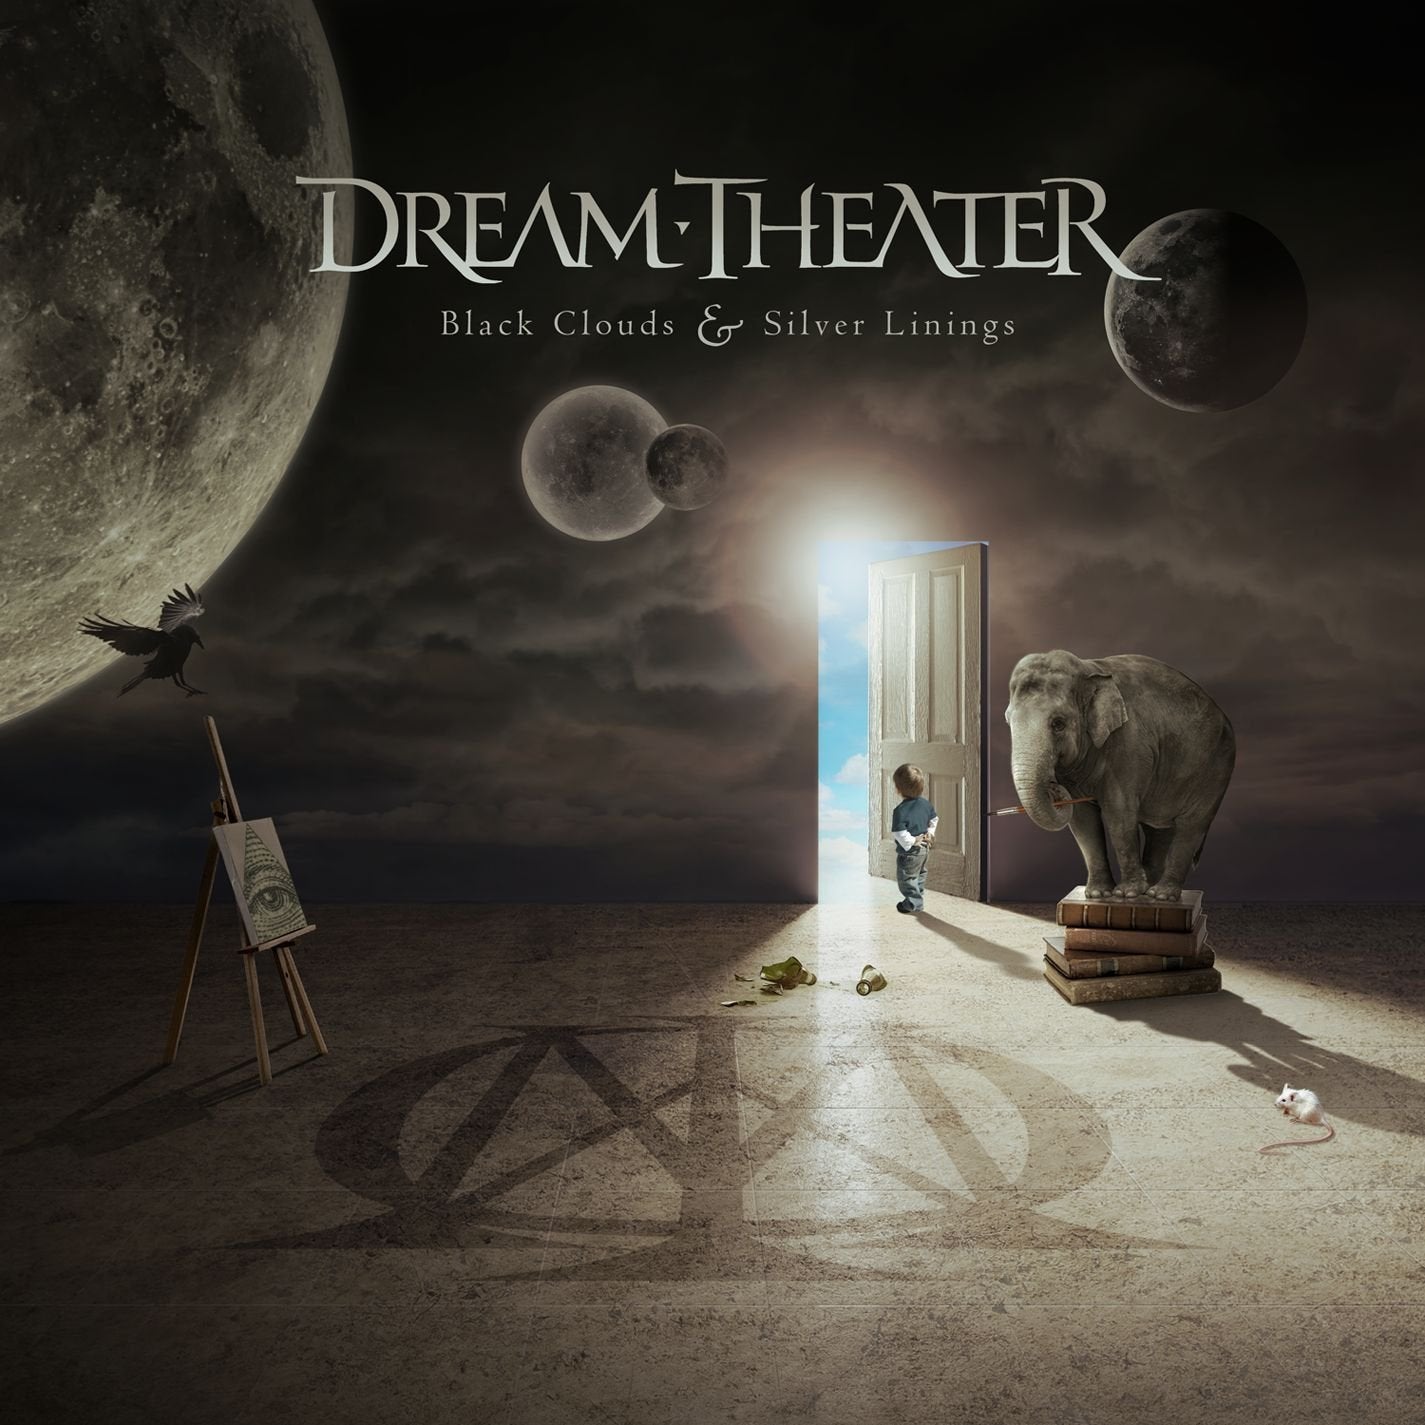 Dream Theater "Black Clouds & Silver Linings" CD